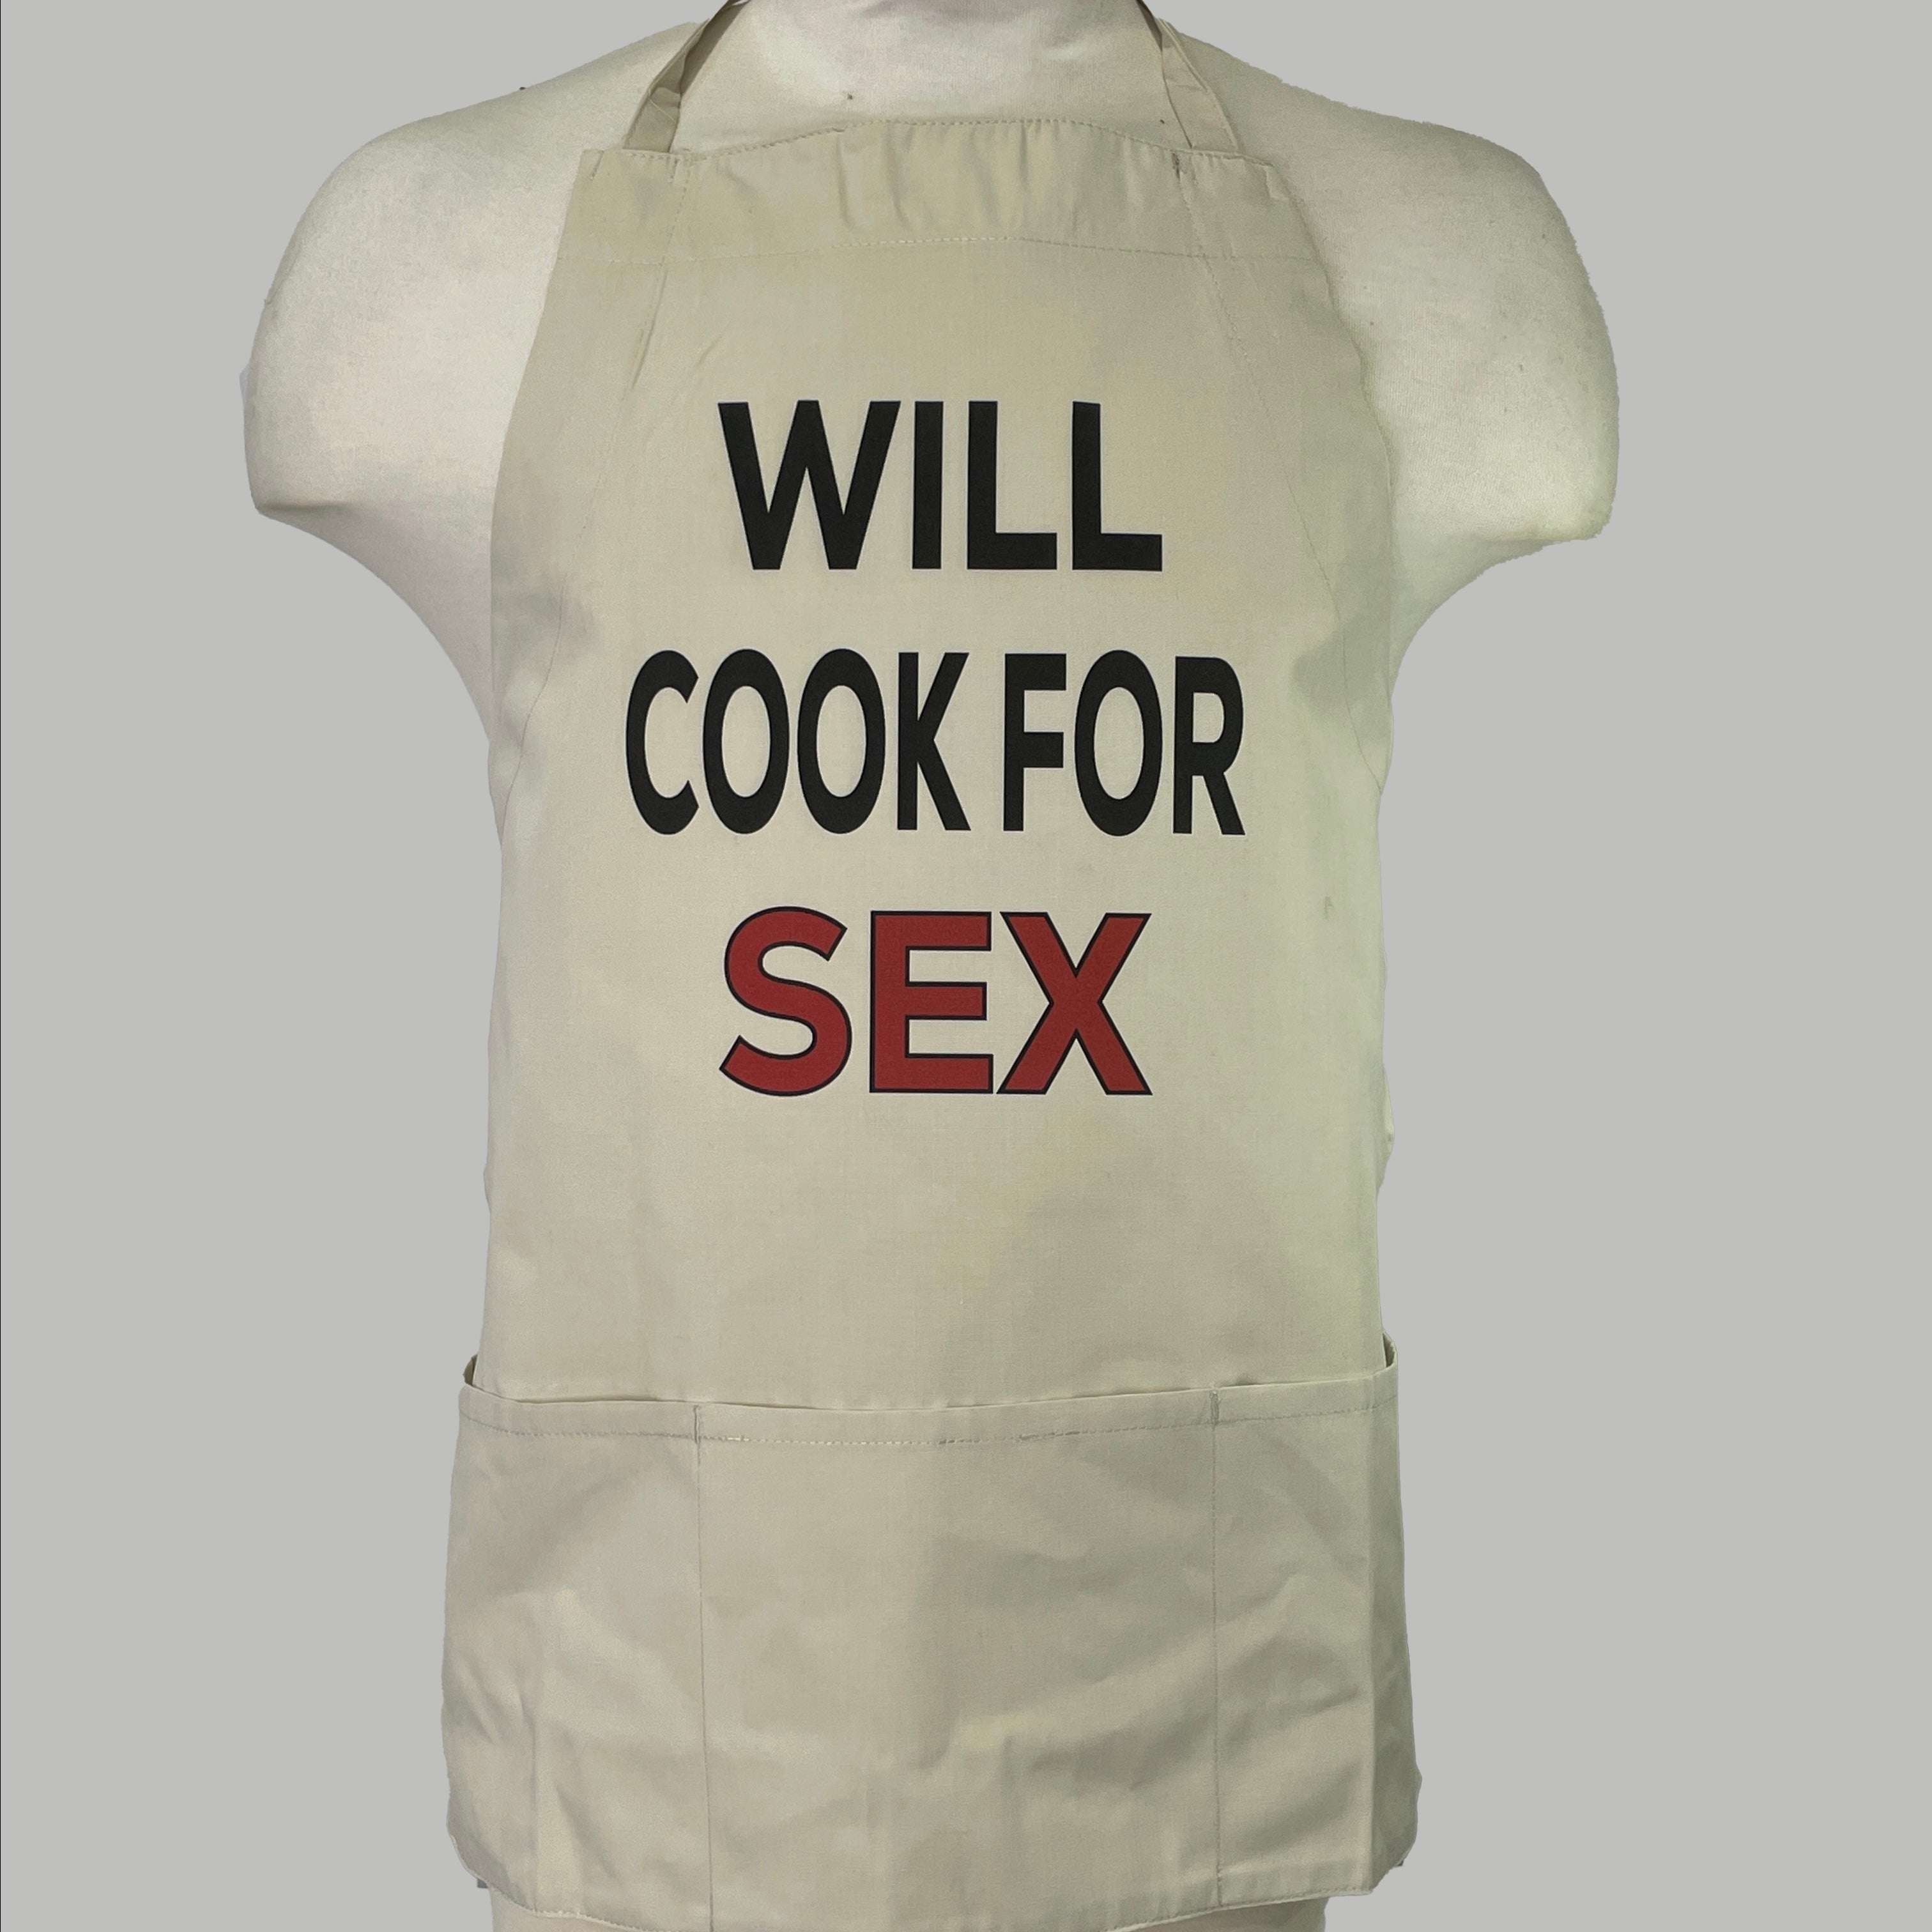 Will cook for sex apron custom printed image